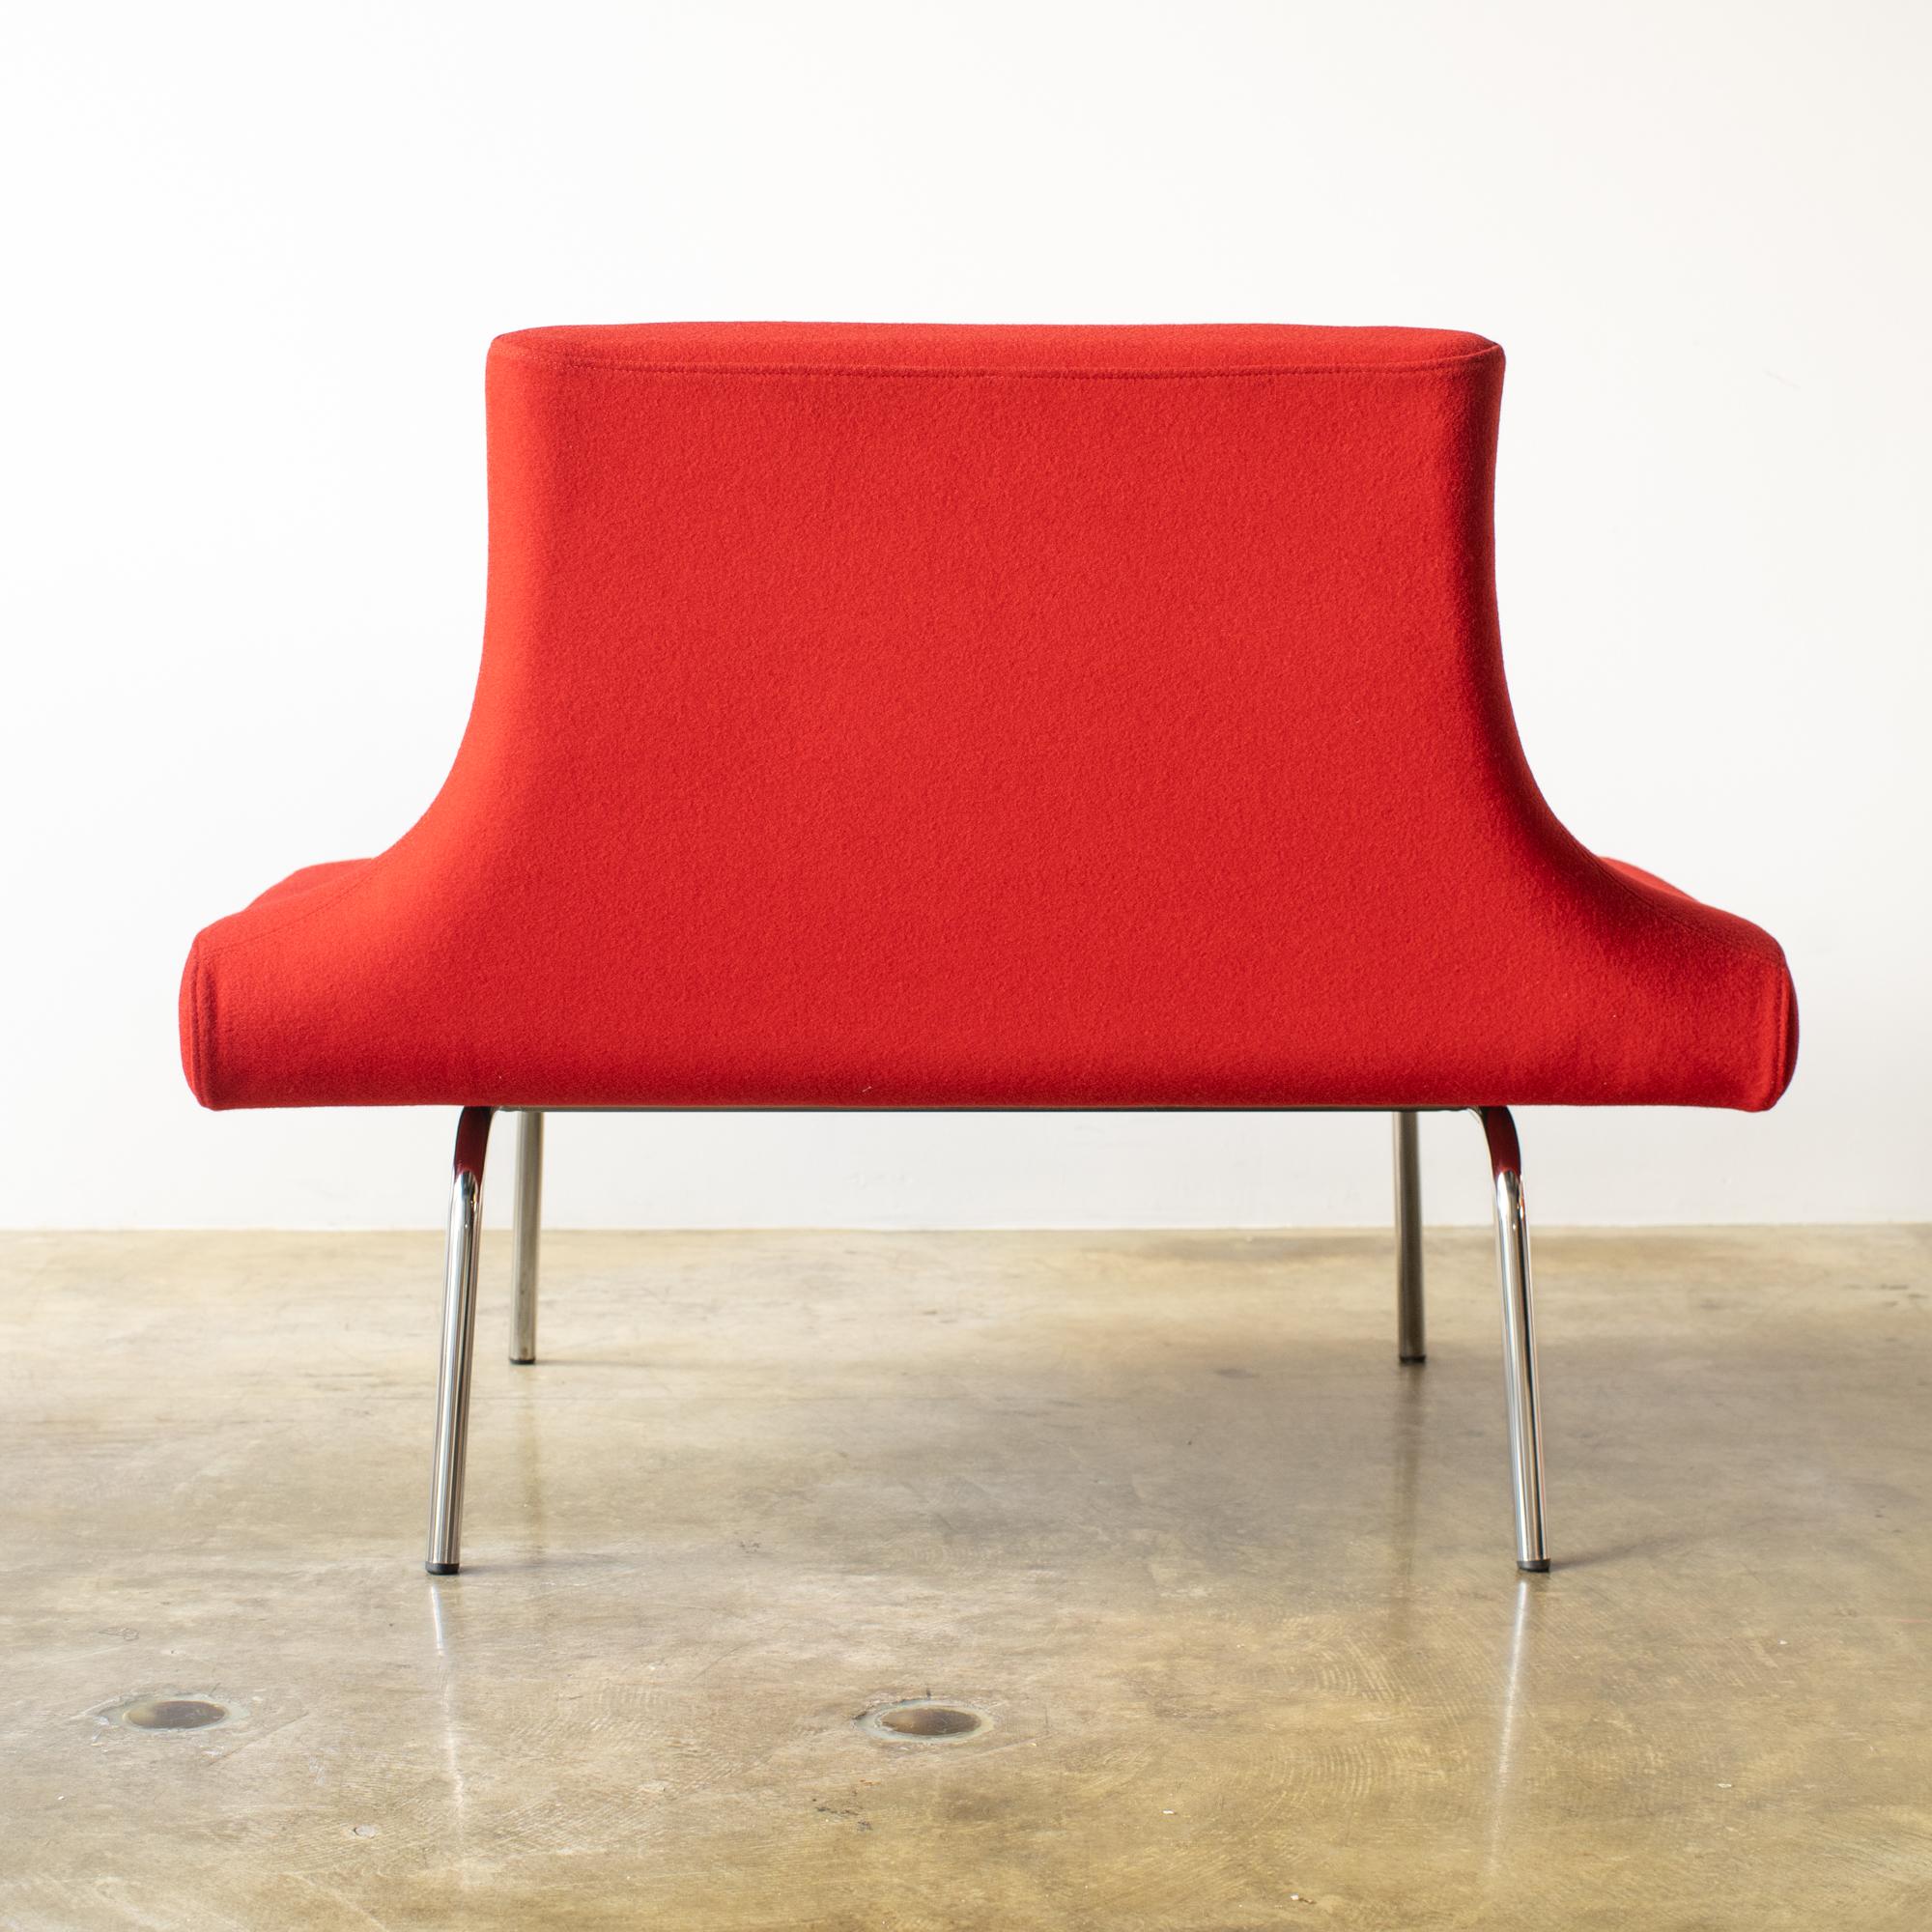 Chair red fabric Orbit sofa Eero Koivisto  Y2K style design space age In Good Condition For Sale In Shibuya-ku, Tokyo